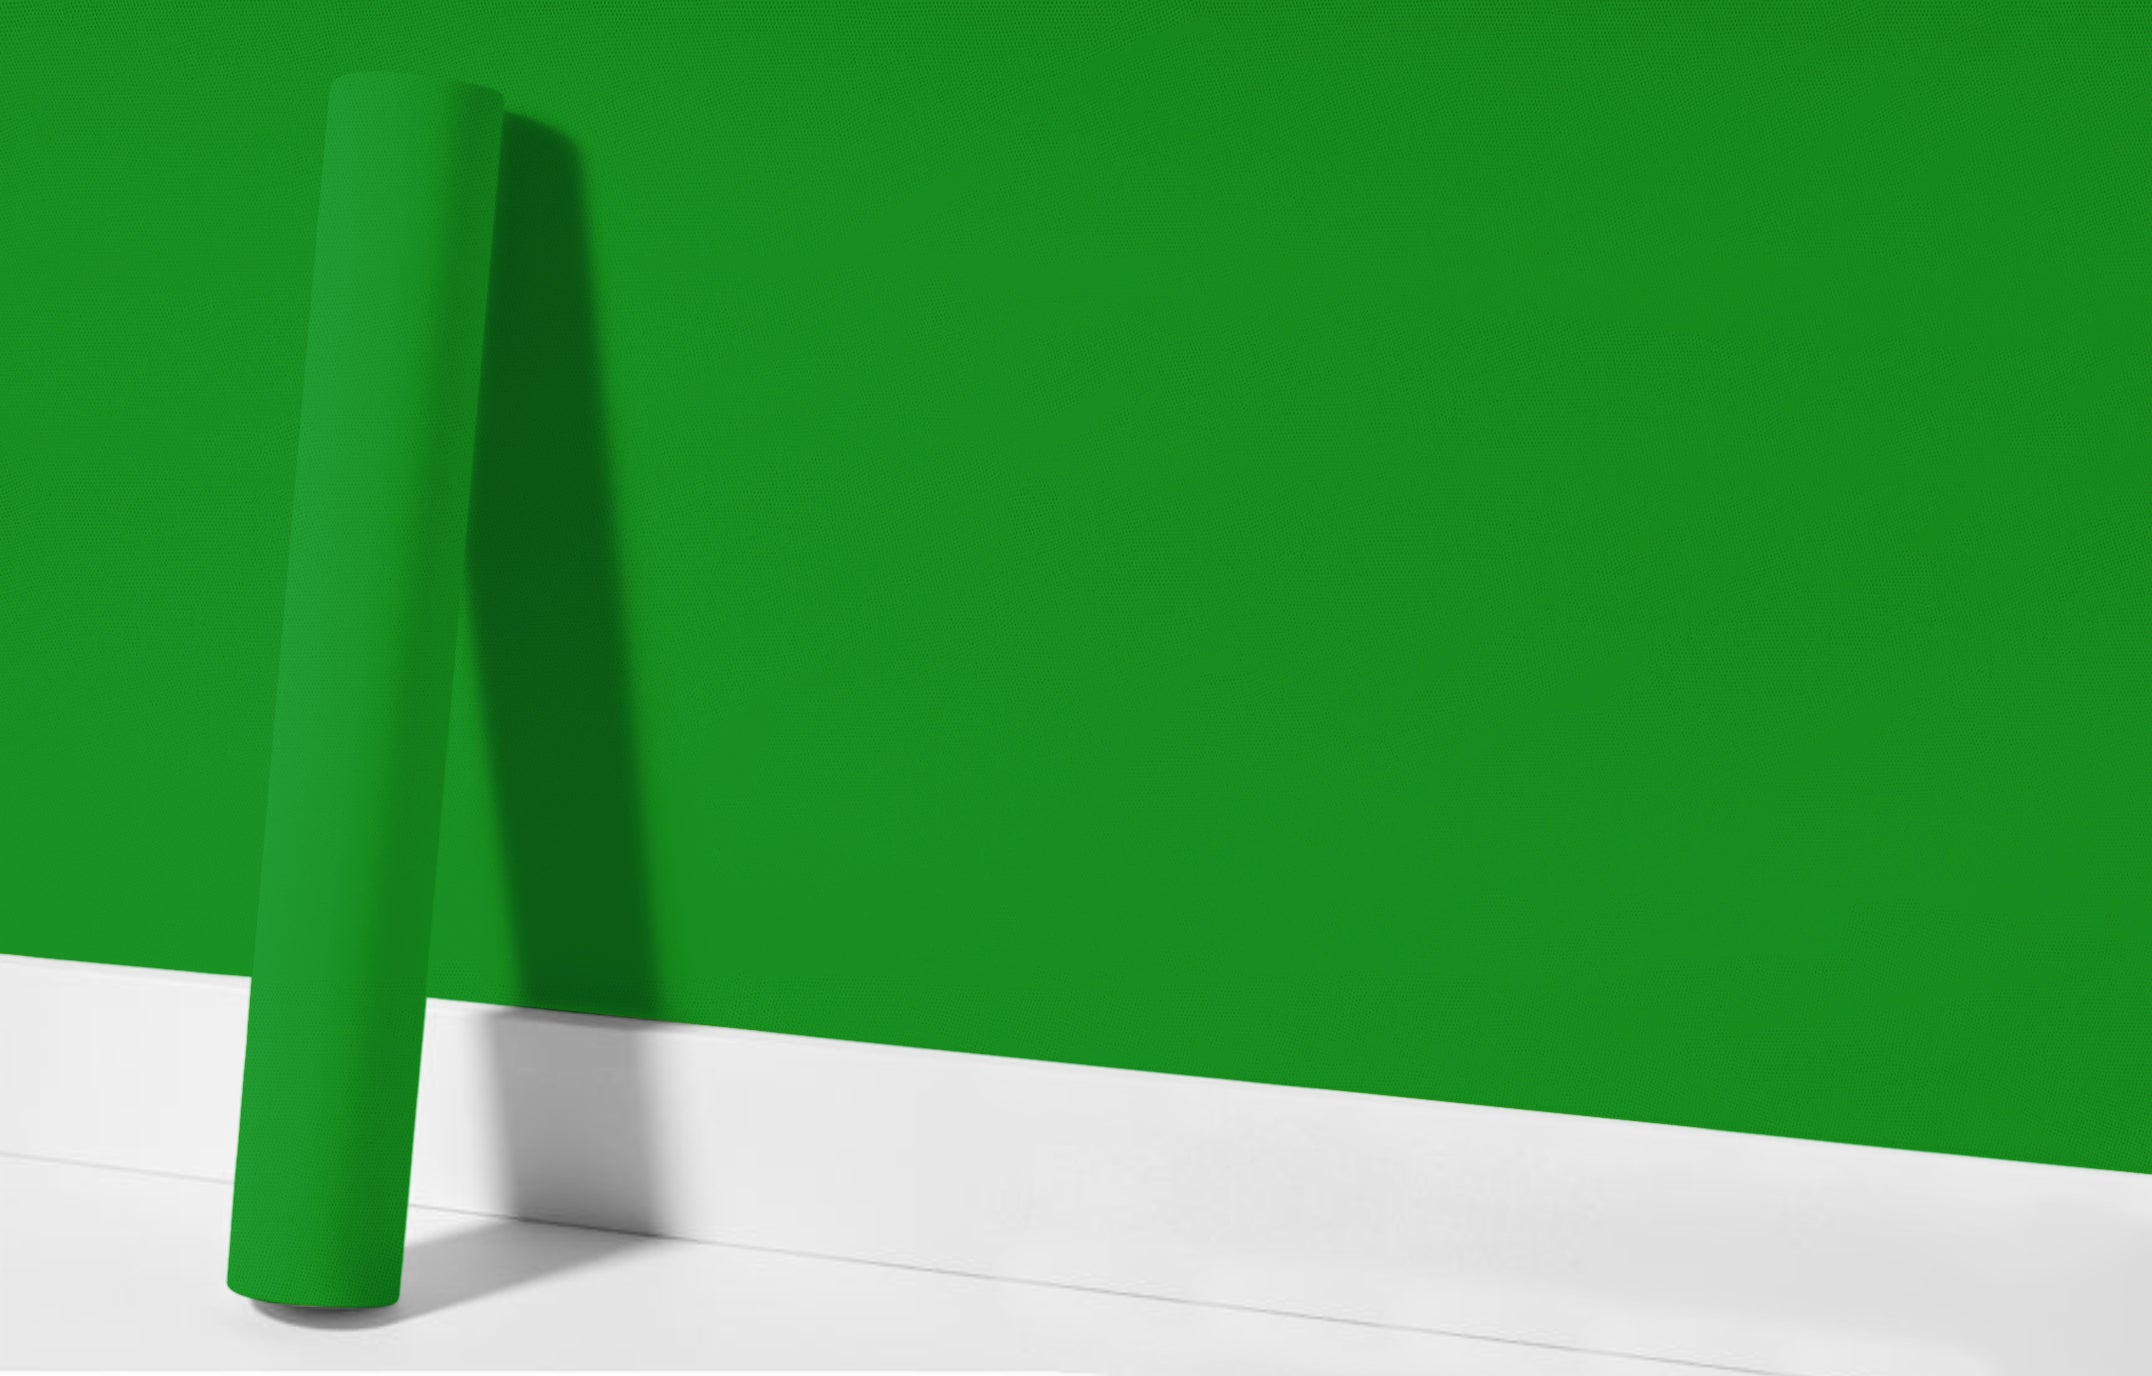 Peel & Stick Removable Re-usable Paint - Color RAL 6037 Pure Green - offRAL™ - RALRAW LLC, USA